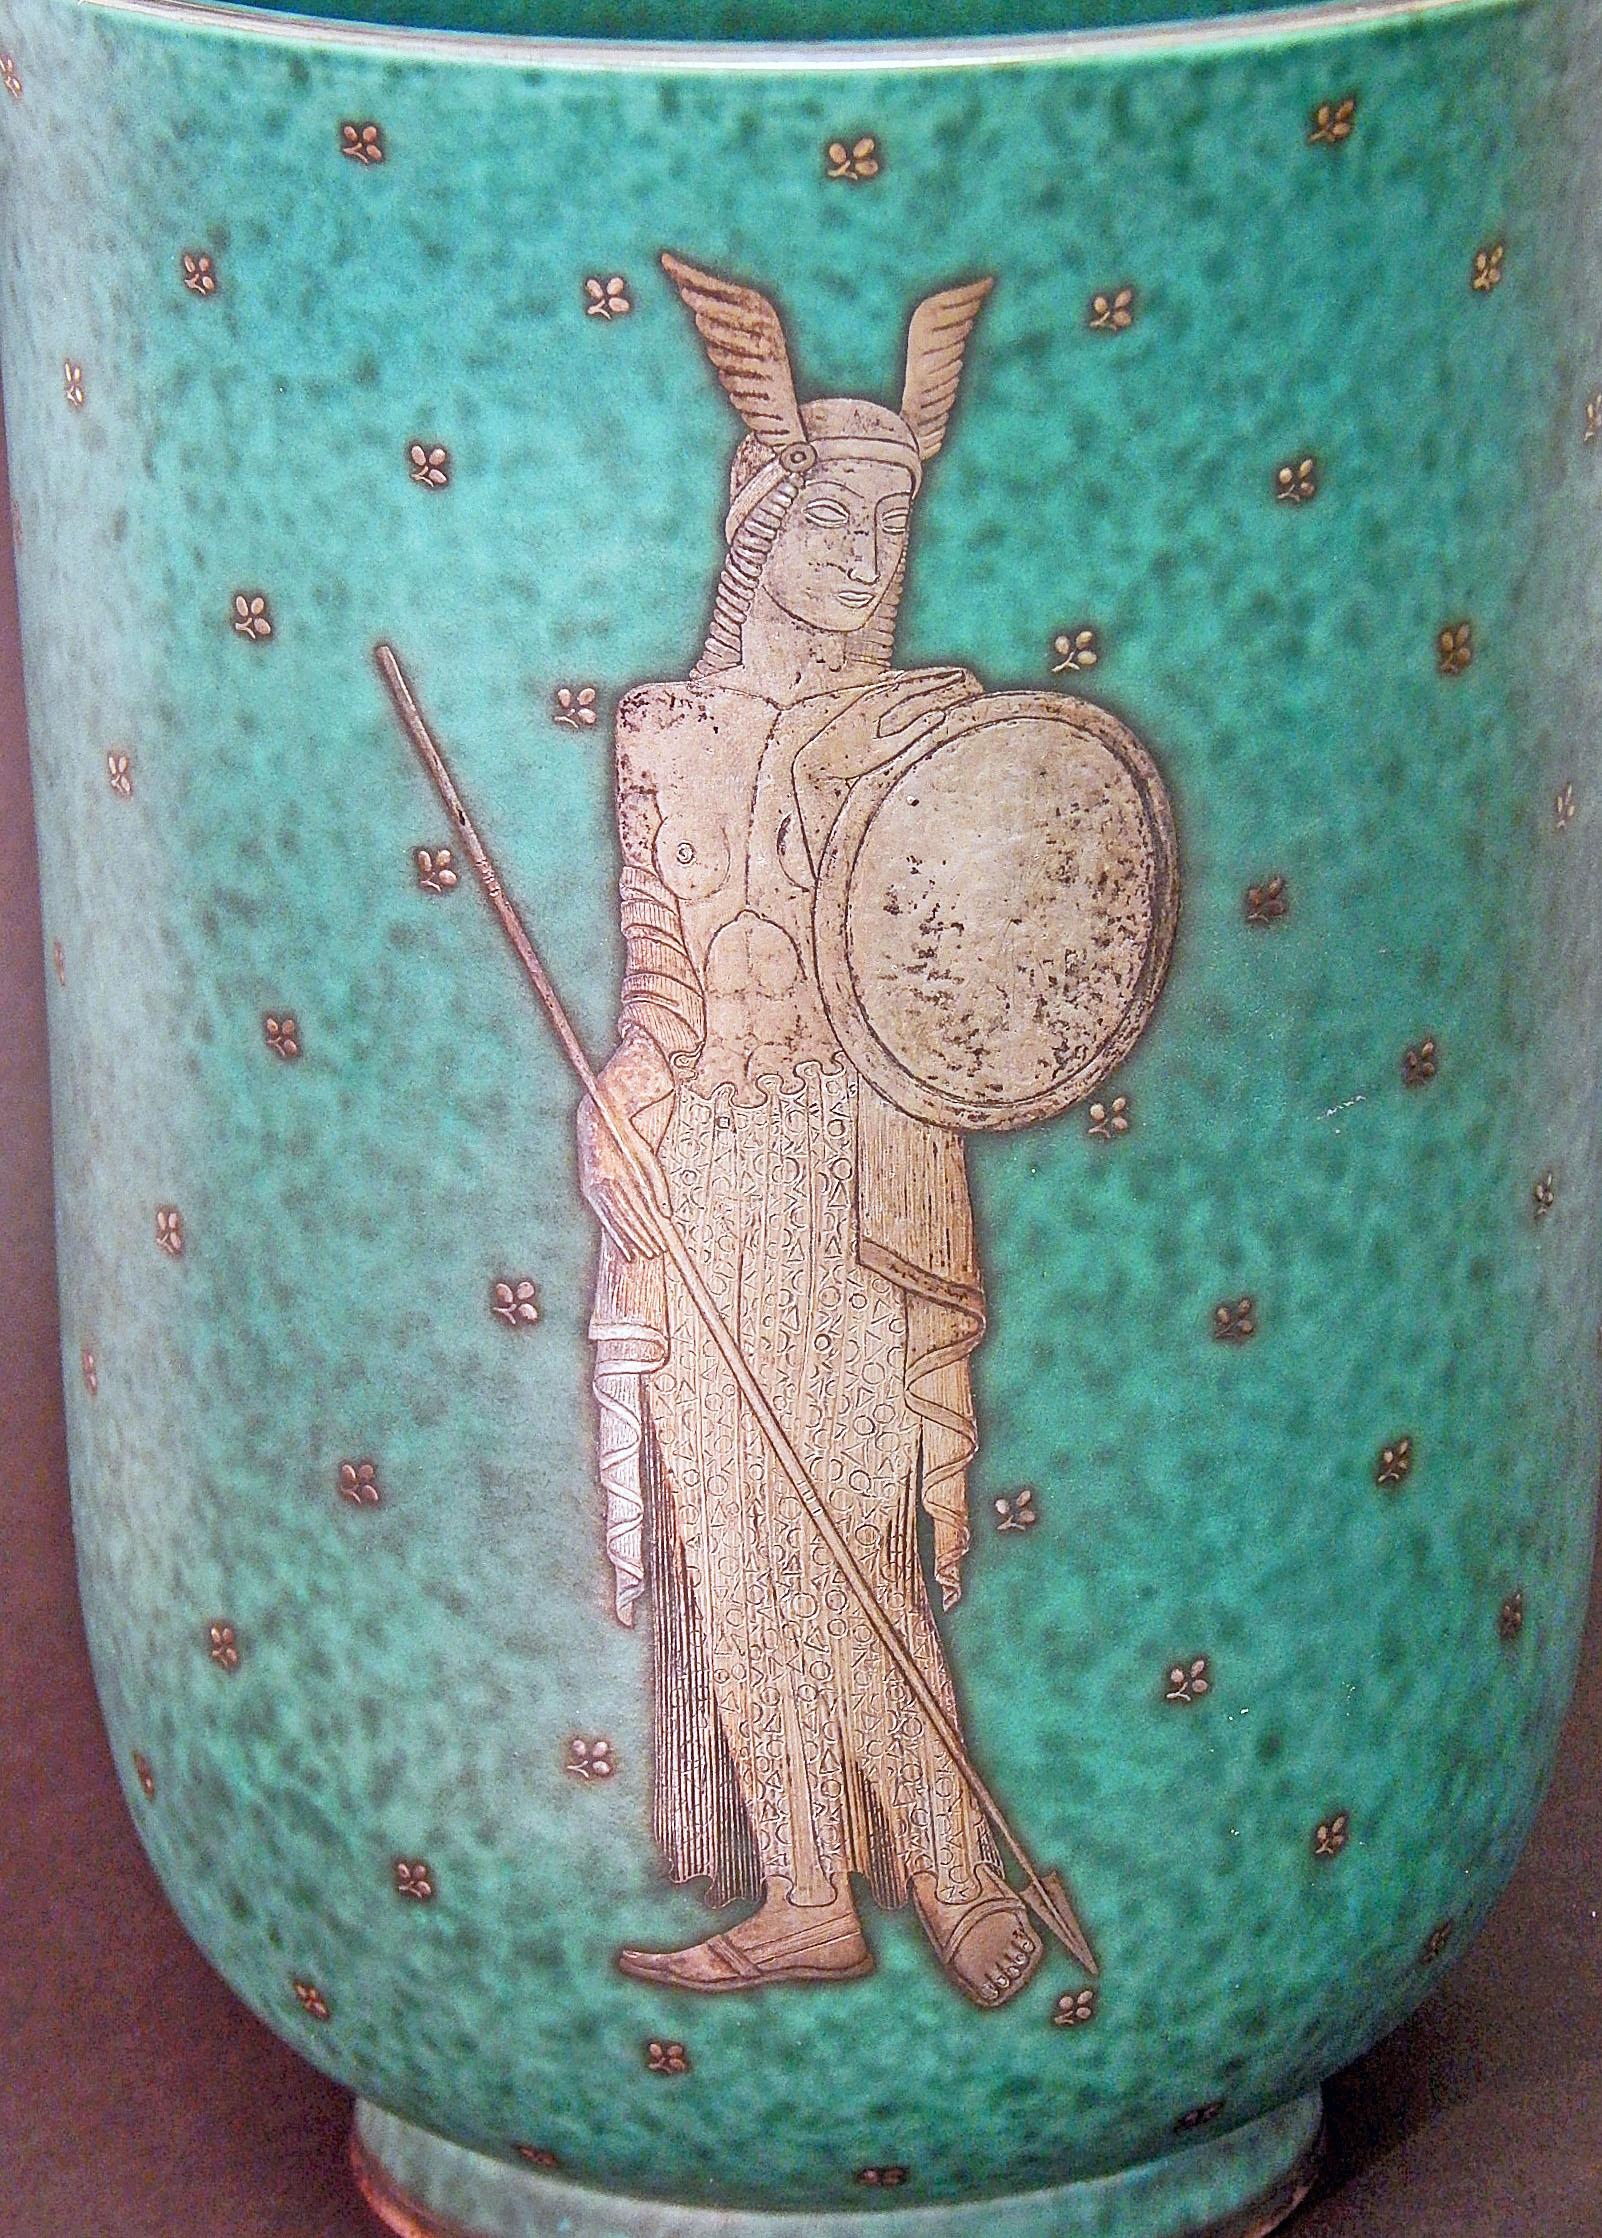 One of the largest and most remarkable Argenta pieces we have ever offered, this vase depicts a half-nude Viking princess, fully equipped with the regalia of her station, including shield, staff and winged helmet. The Argenta line of ceramics